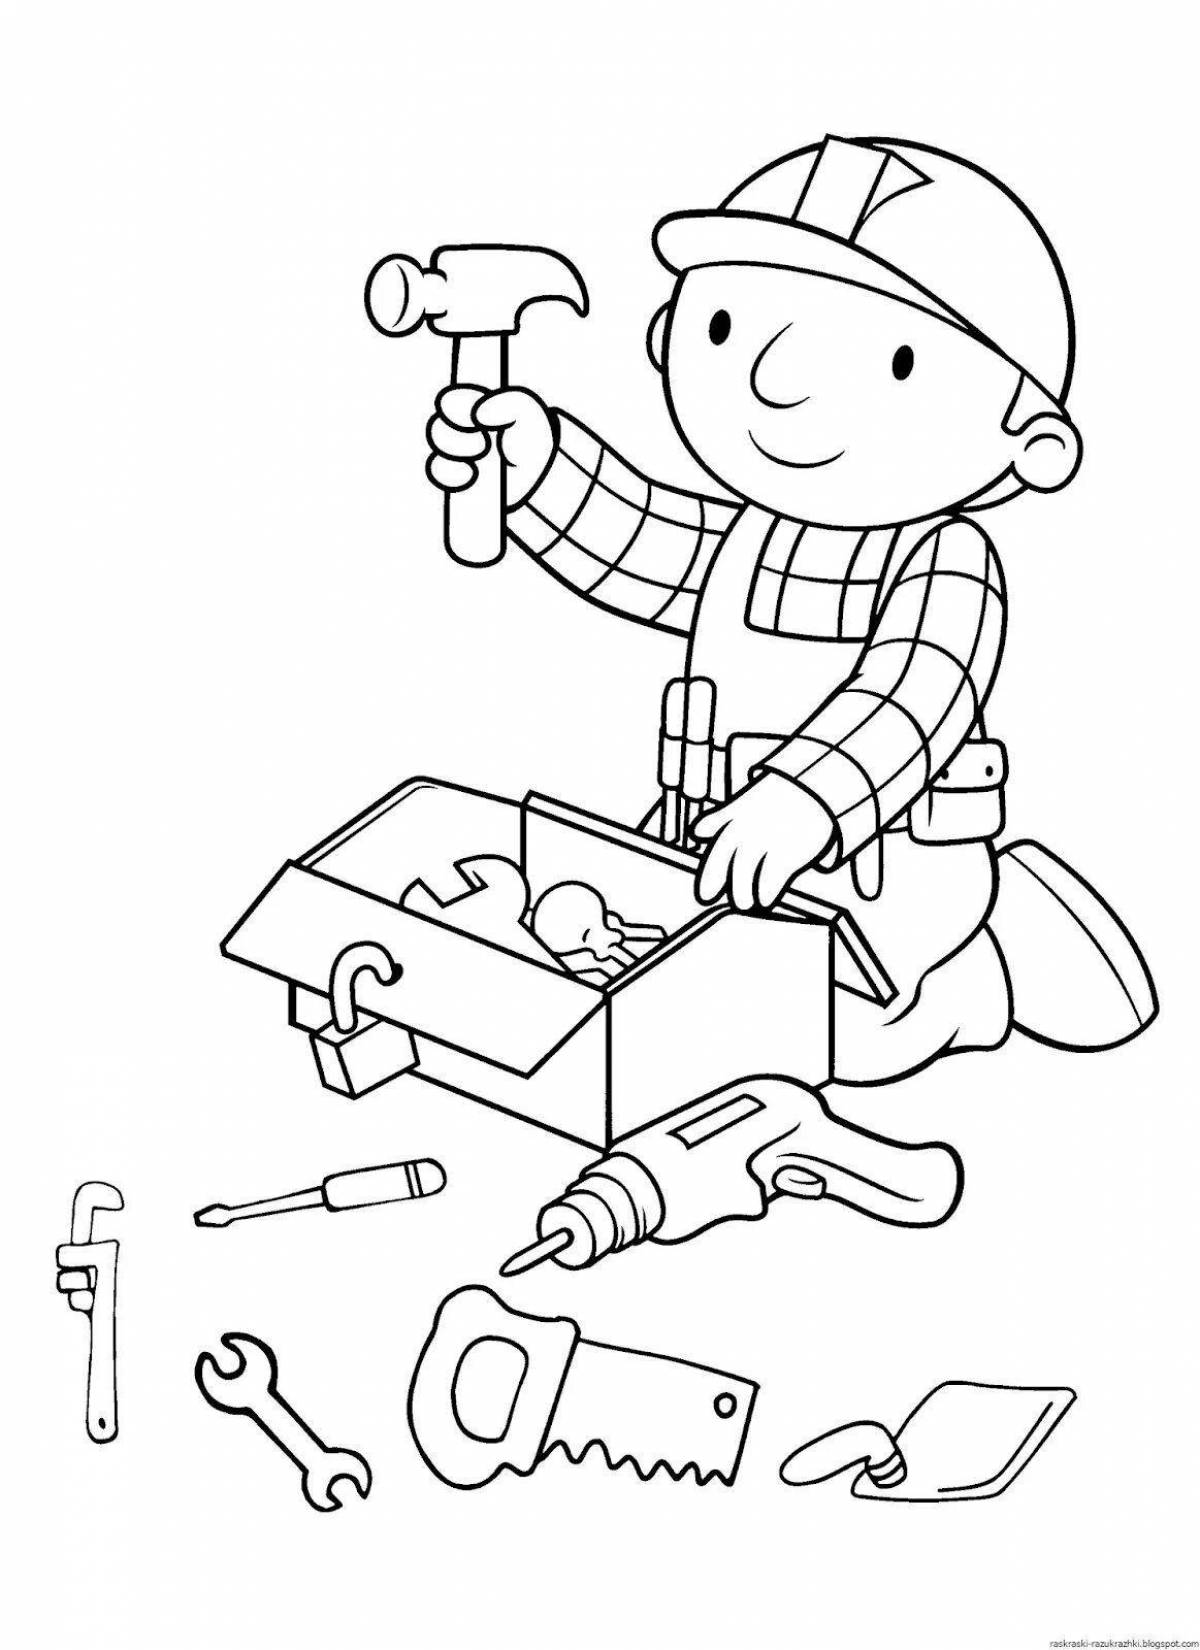 Creative tools coloring page for 3-4 year olds